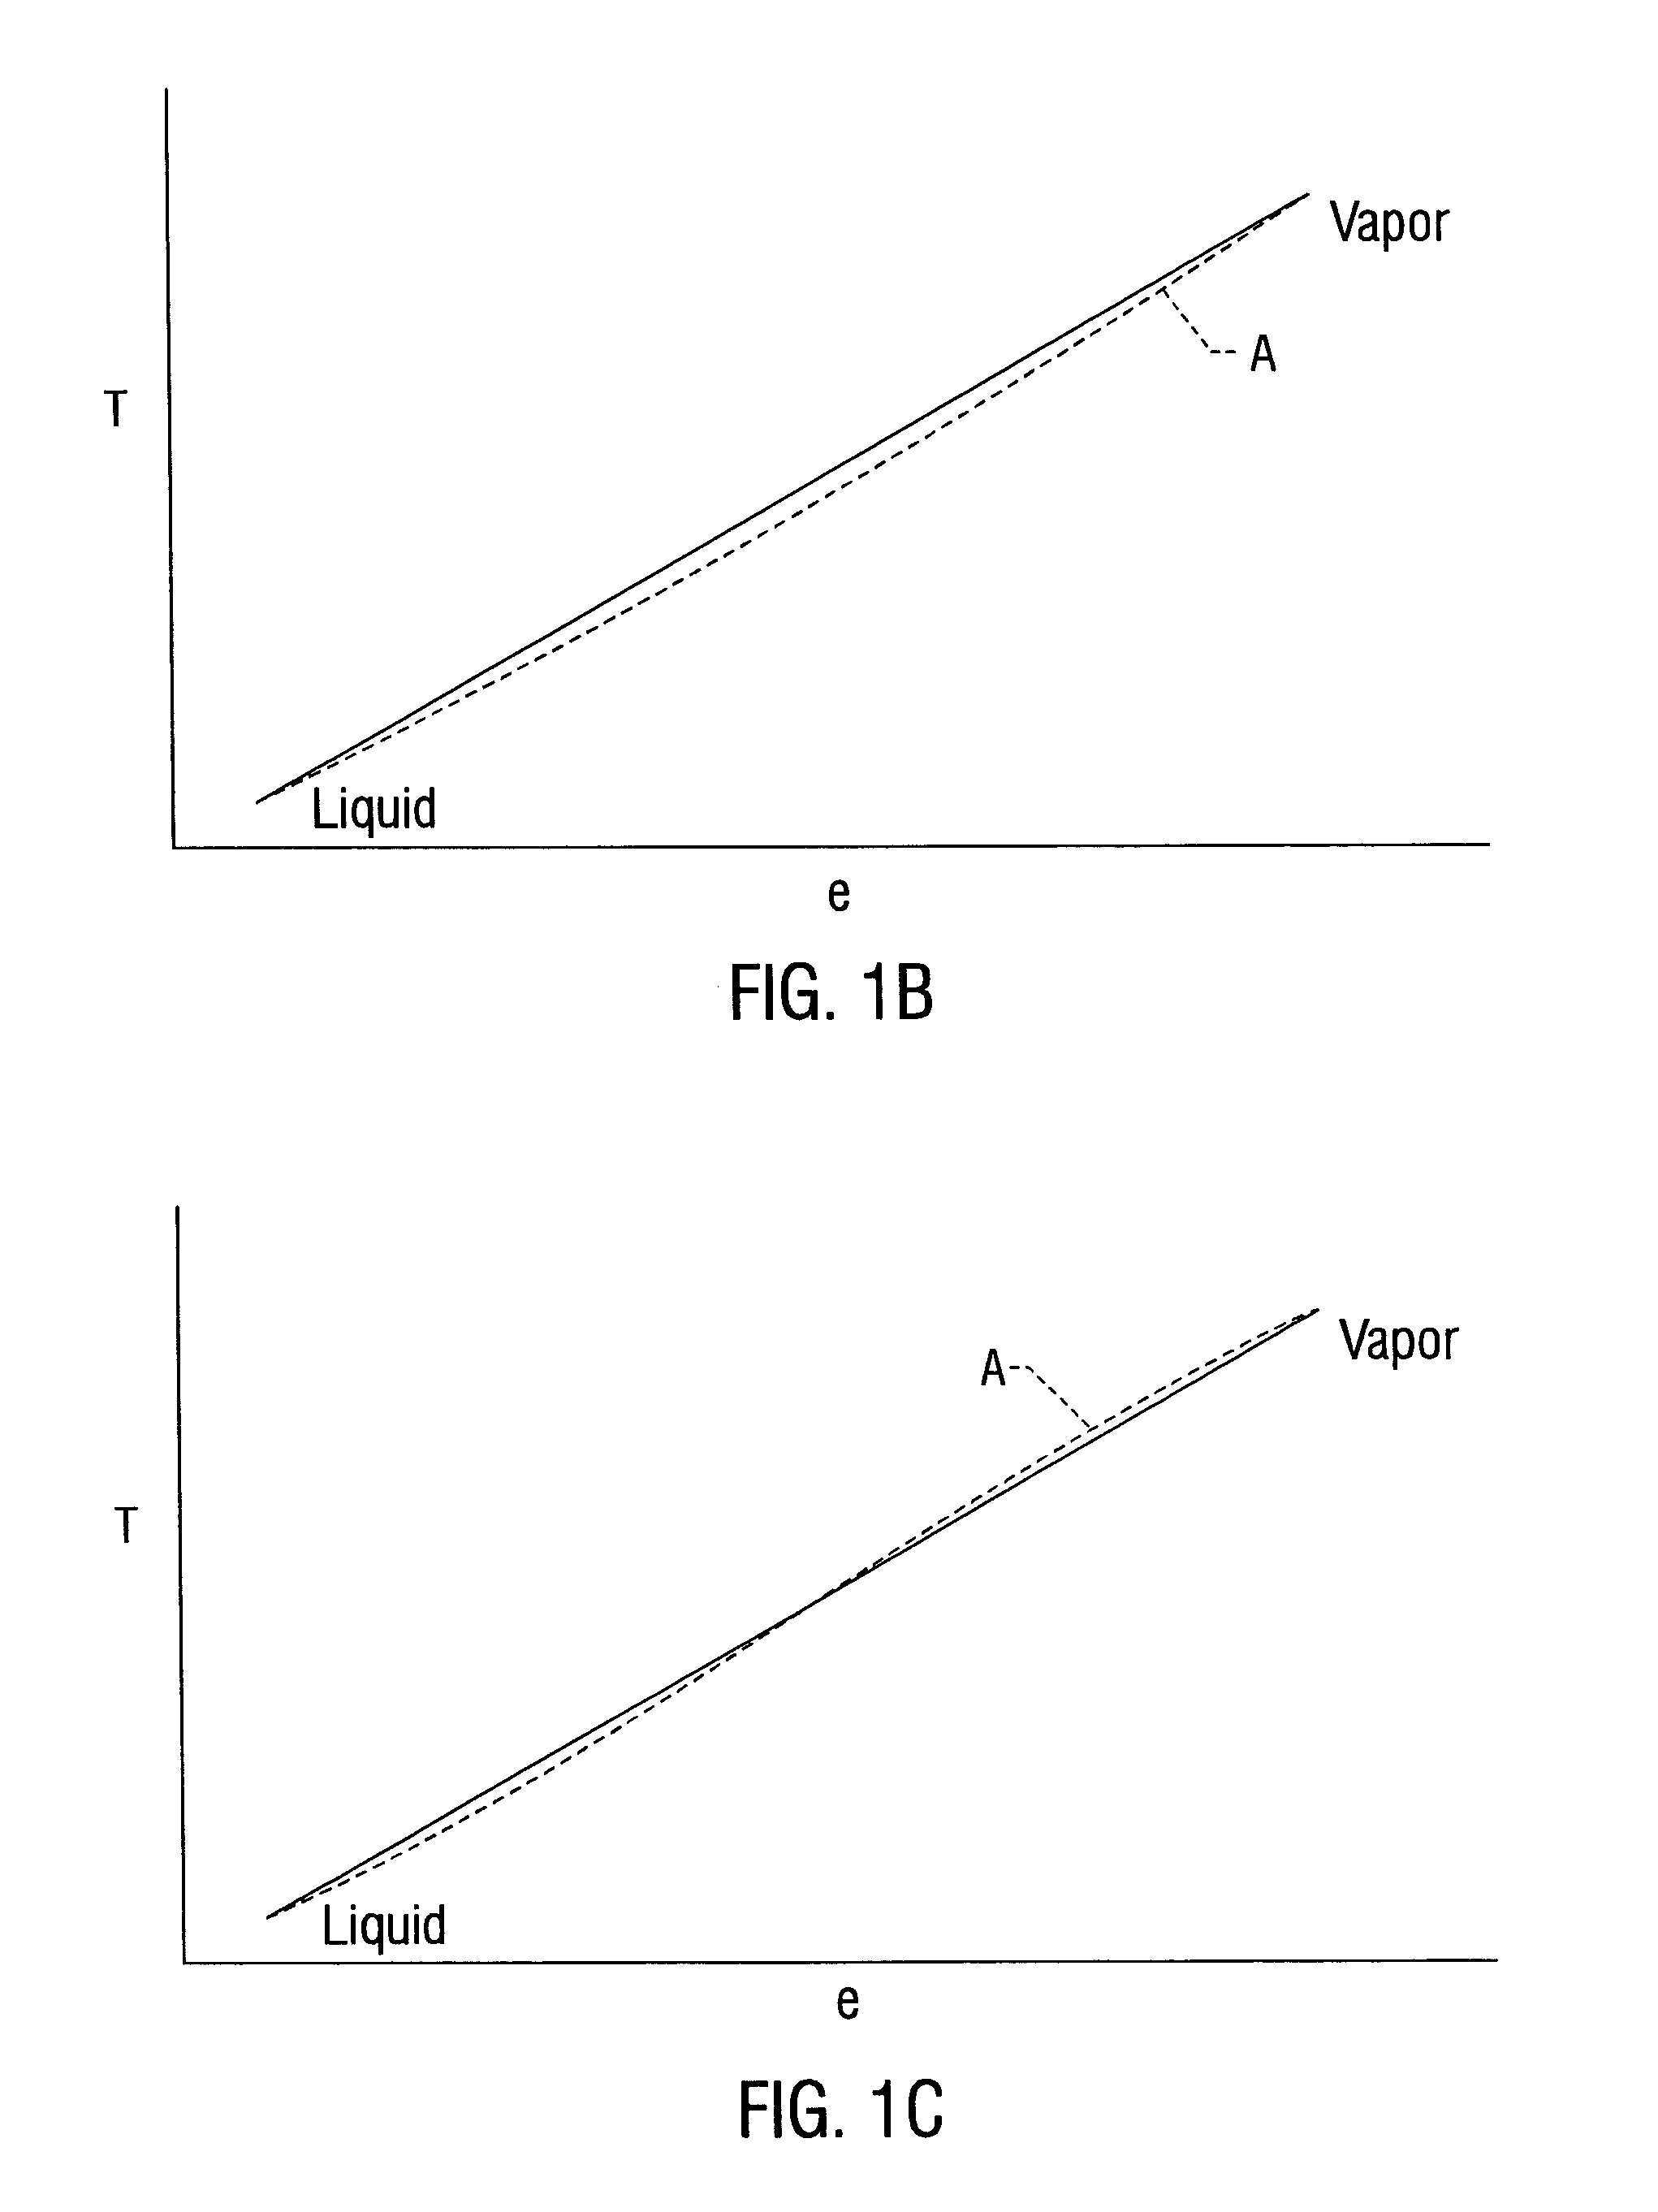 Advanced heat recovery and energy conversion systems for power generation and pollution emissions reduction, and methods of using same